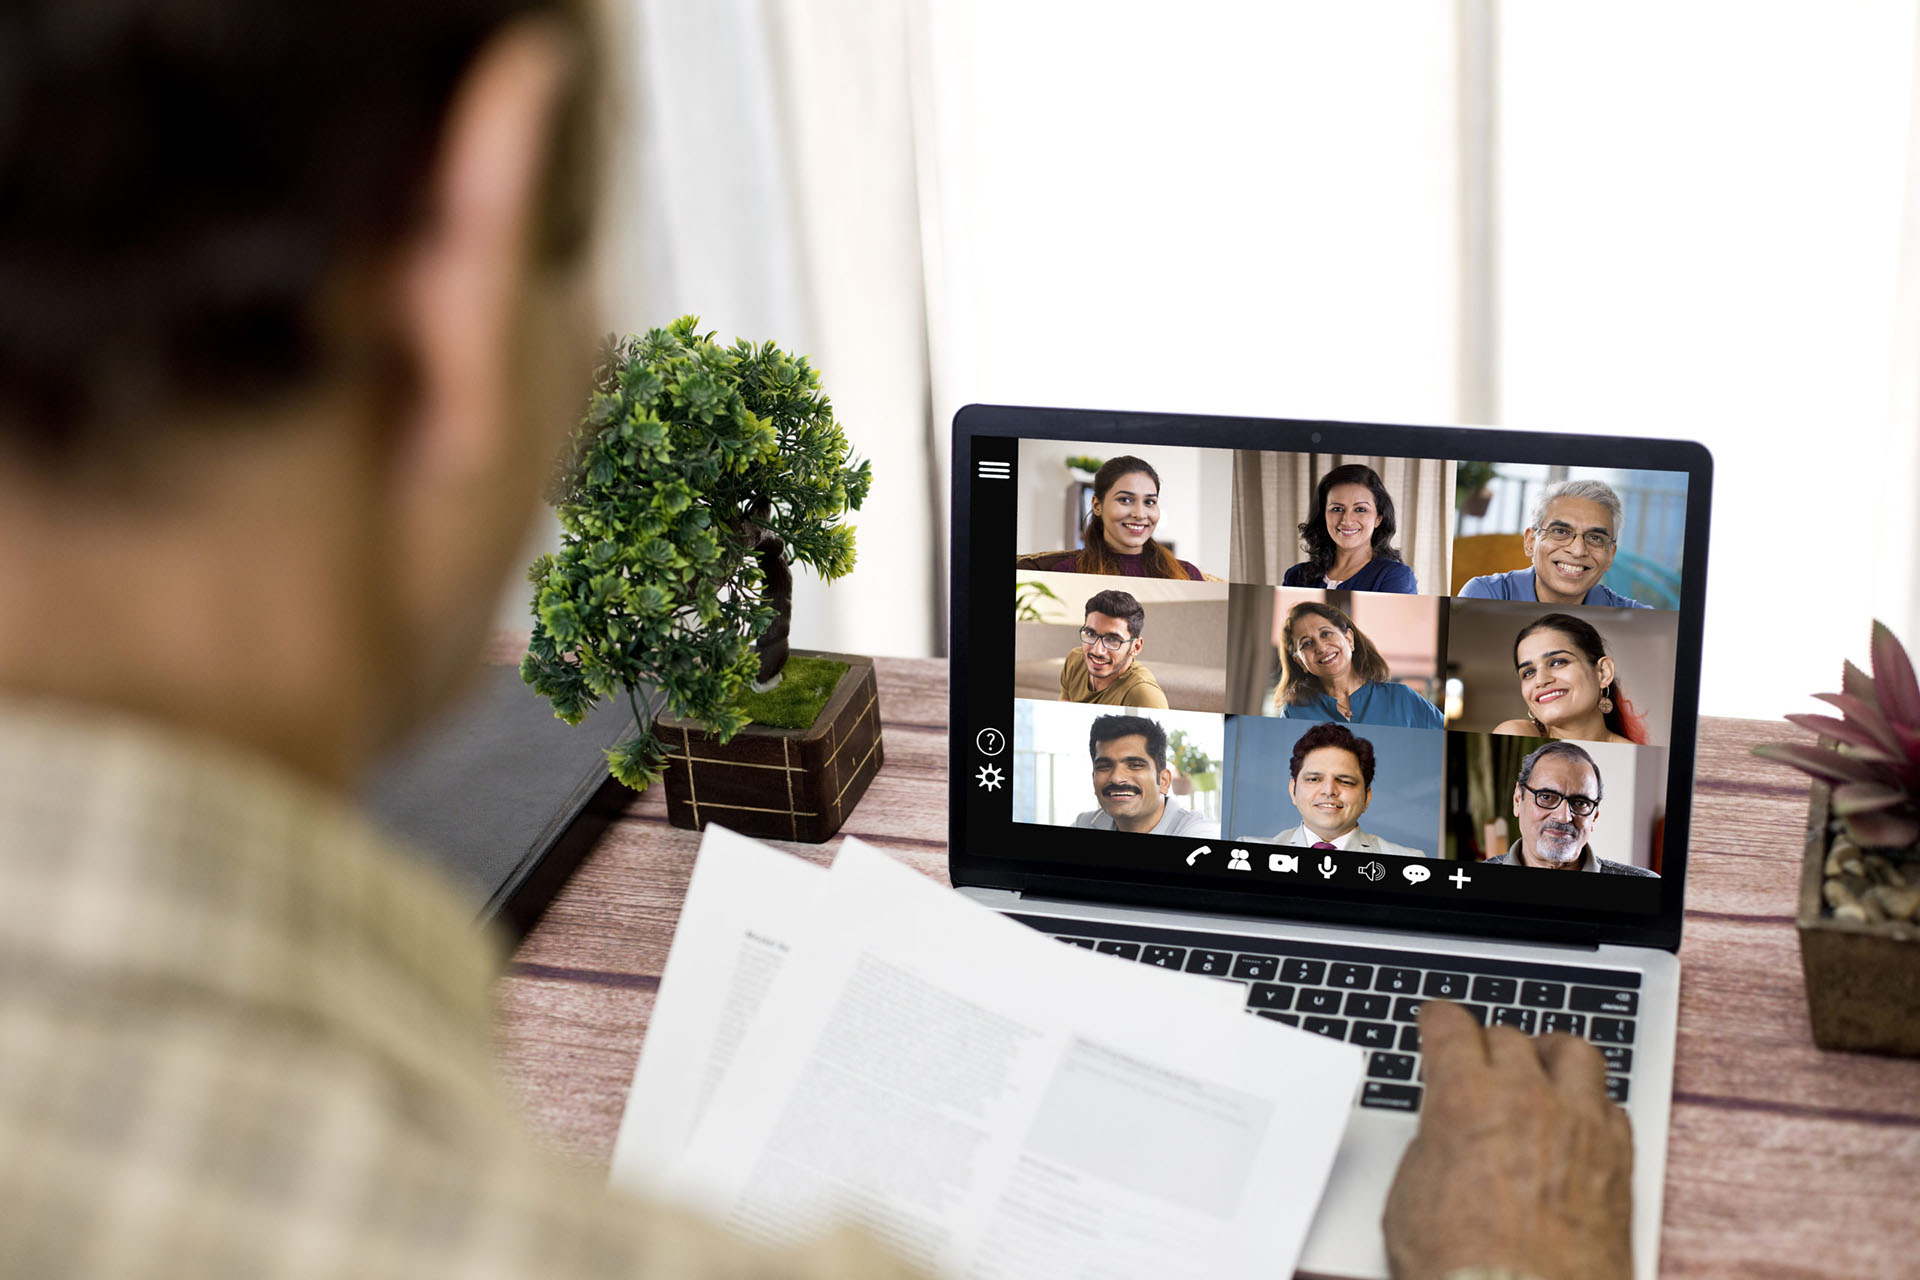 A man attends a remote video conference meeting on laptop at home